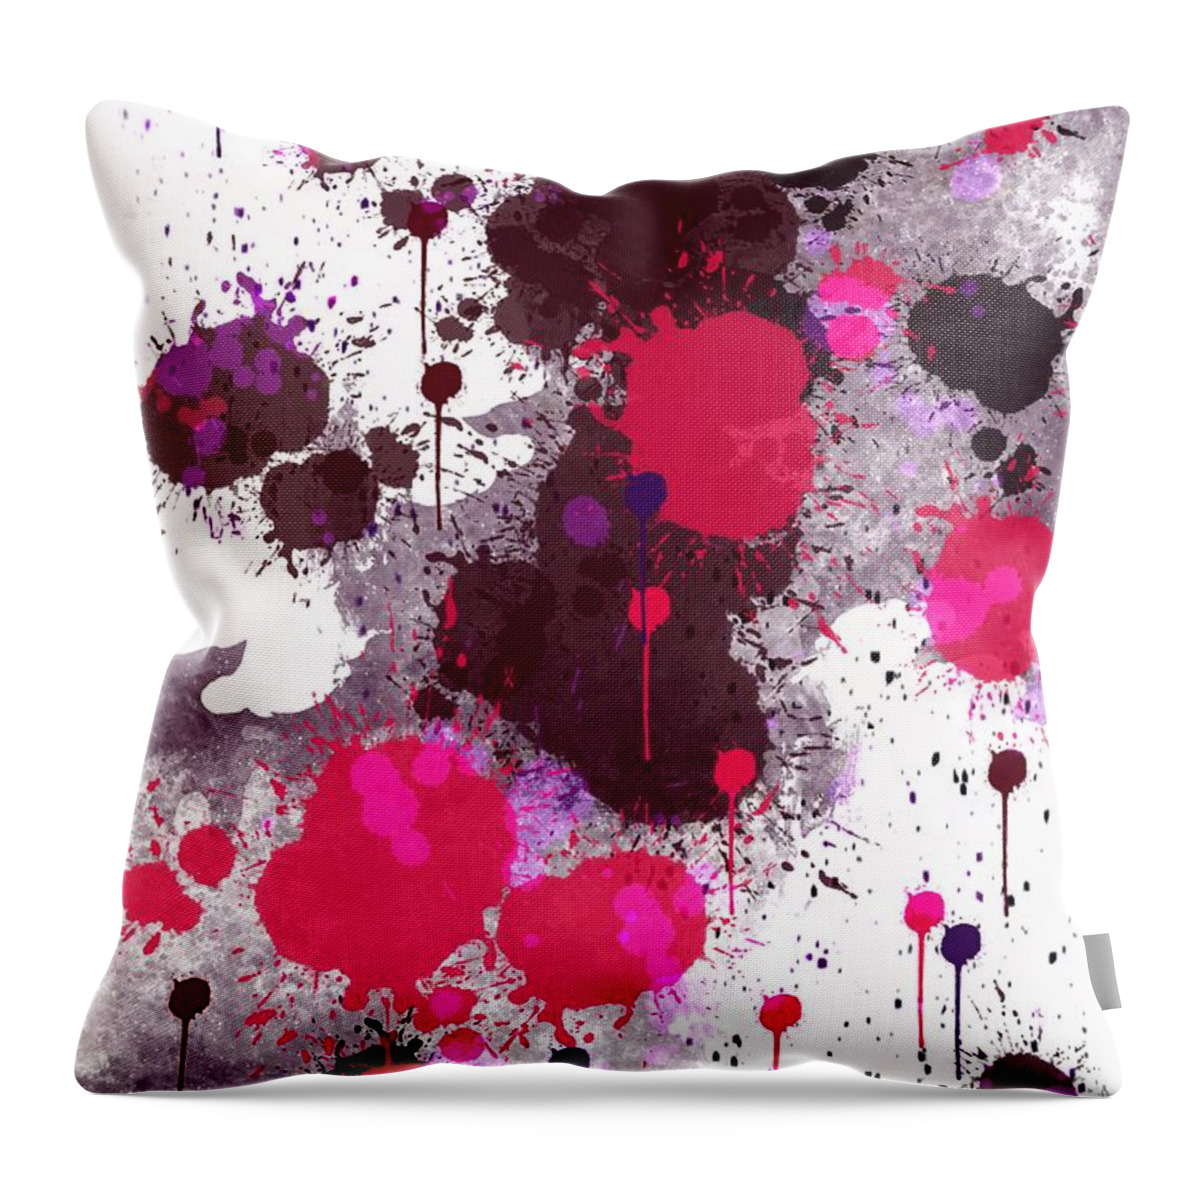  Throw Pillow featuring the digital art A Study in Blood Spatter Analysis by Michelle Hoffmann